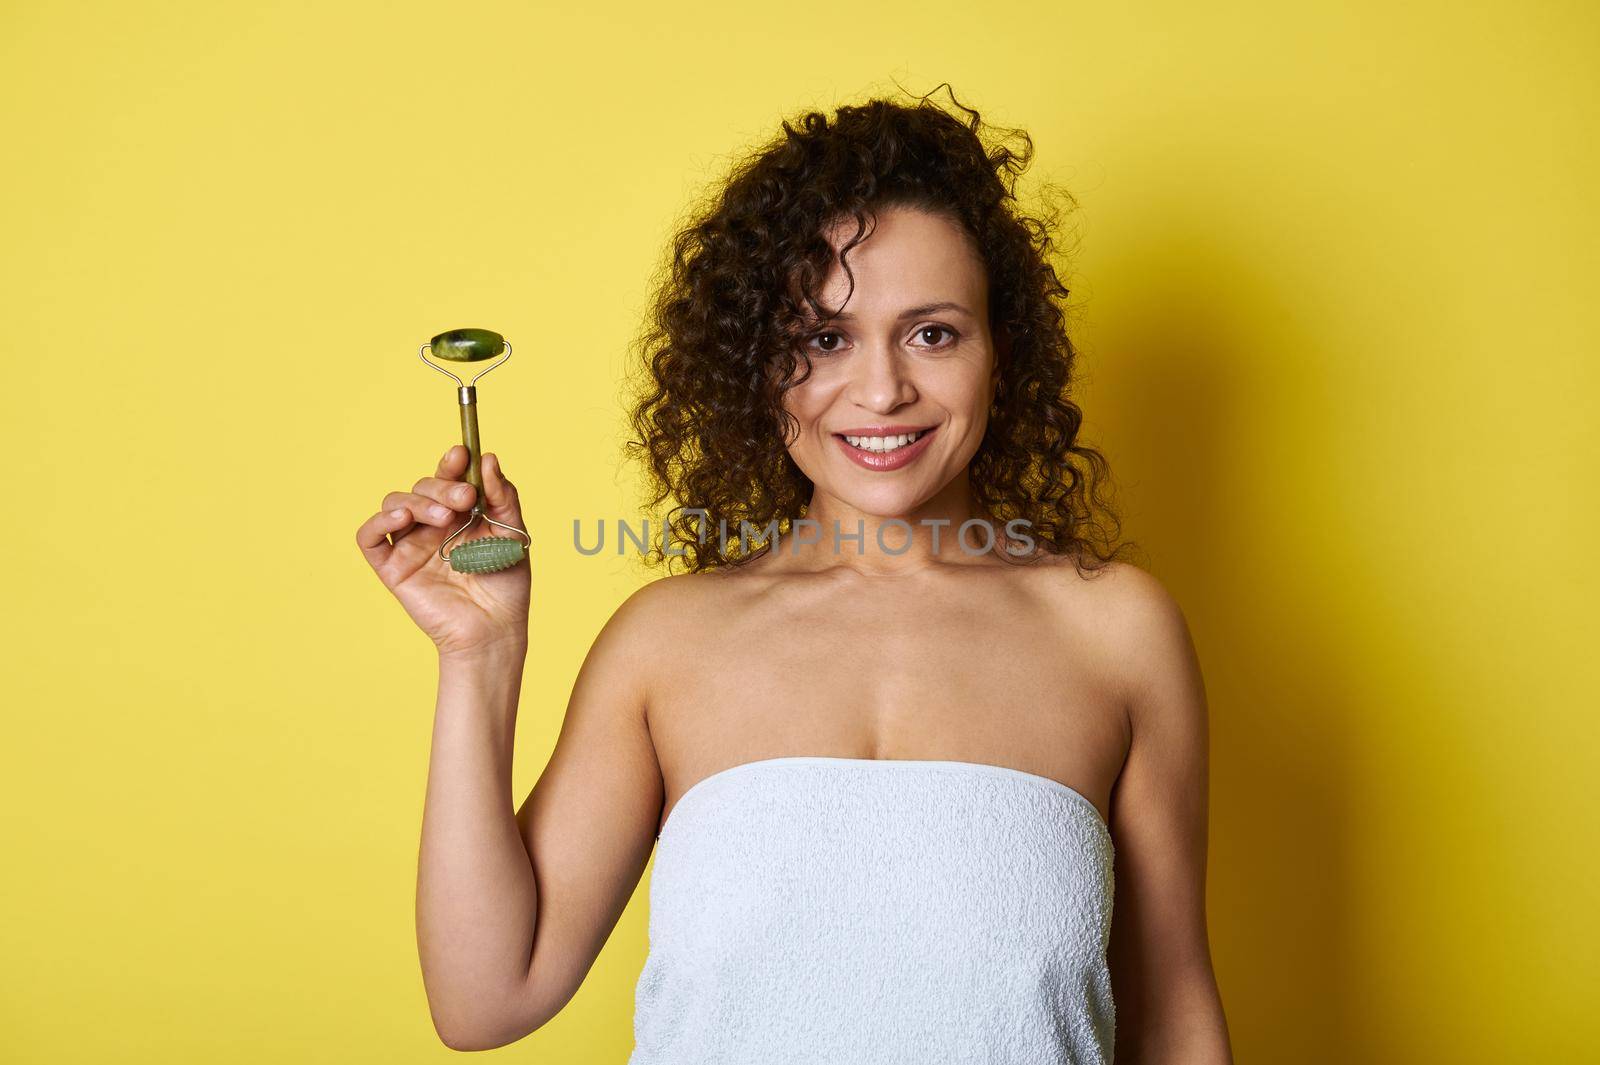 Beauty portrait of young curly haired woman holding jade roller and smiling toothy smile posing over yellow background by artgf